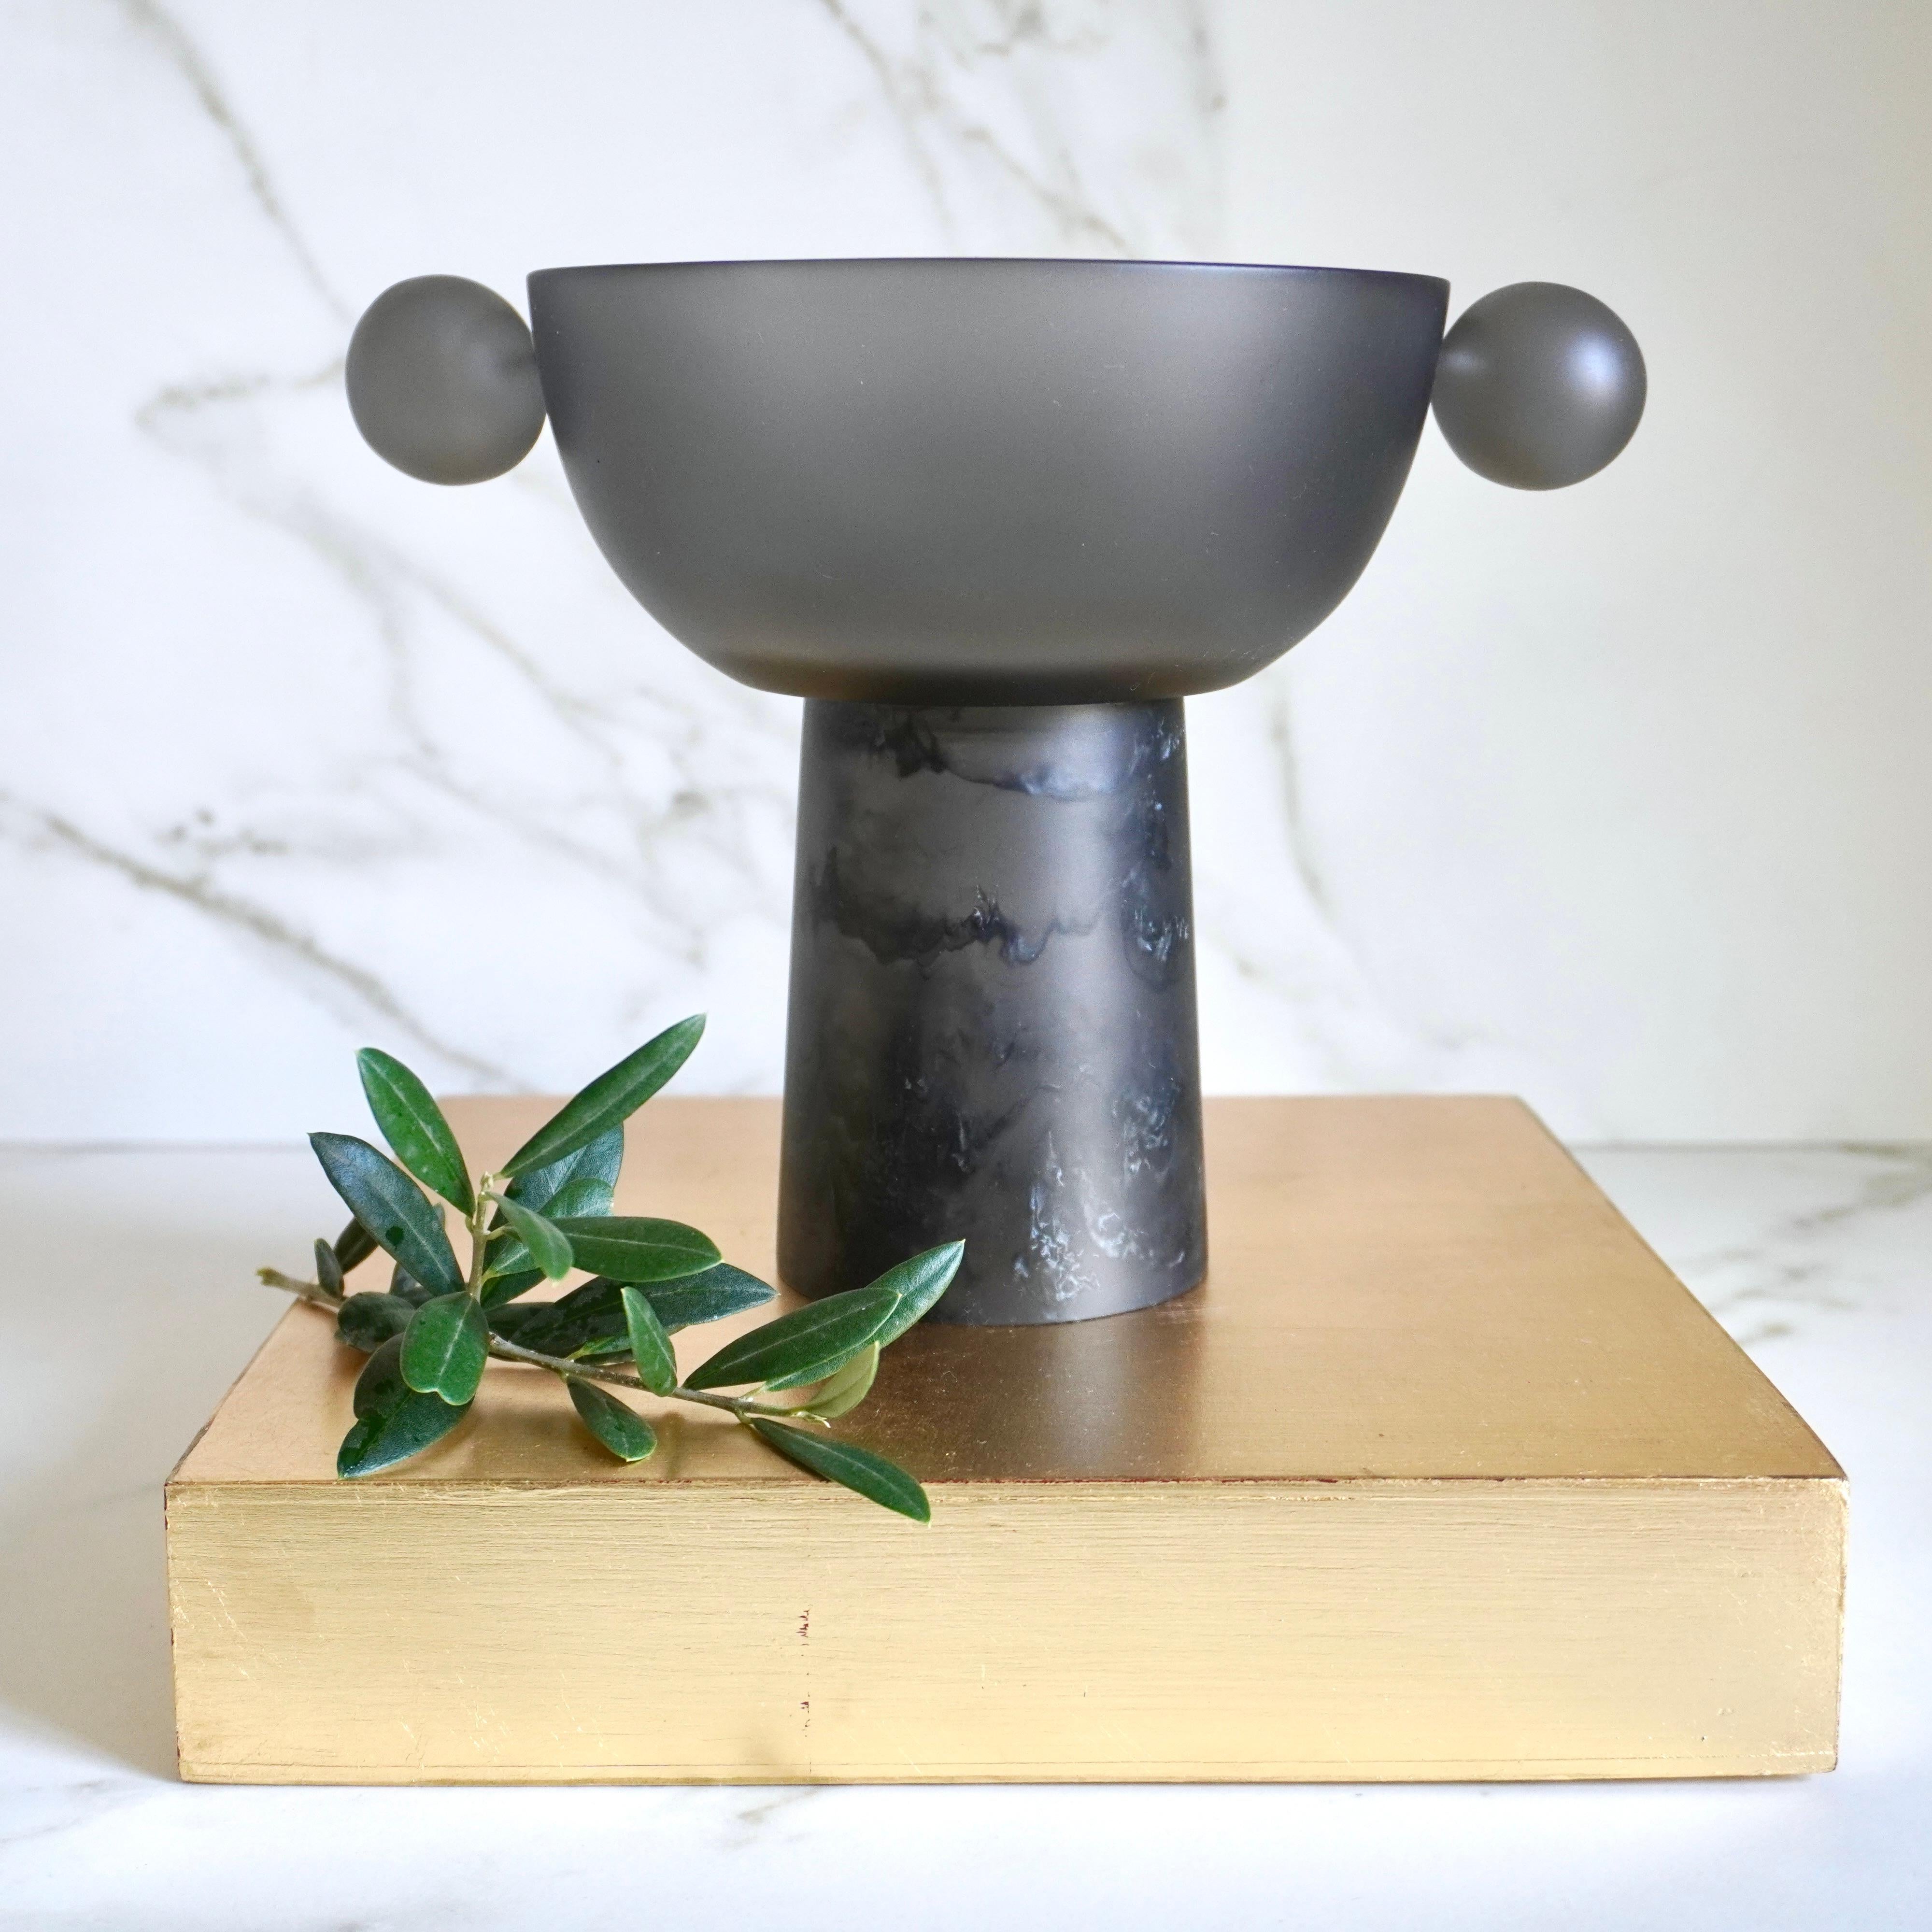 This small pedestal stands tall as a stately centerpiece or bookshelf display. The spheres give the piece a playful and modern look, making it a perfect statement piece for any space.

Bowl and spheres: Traslucid smoke resin in satin